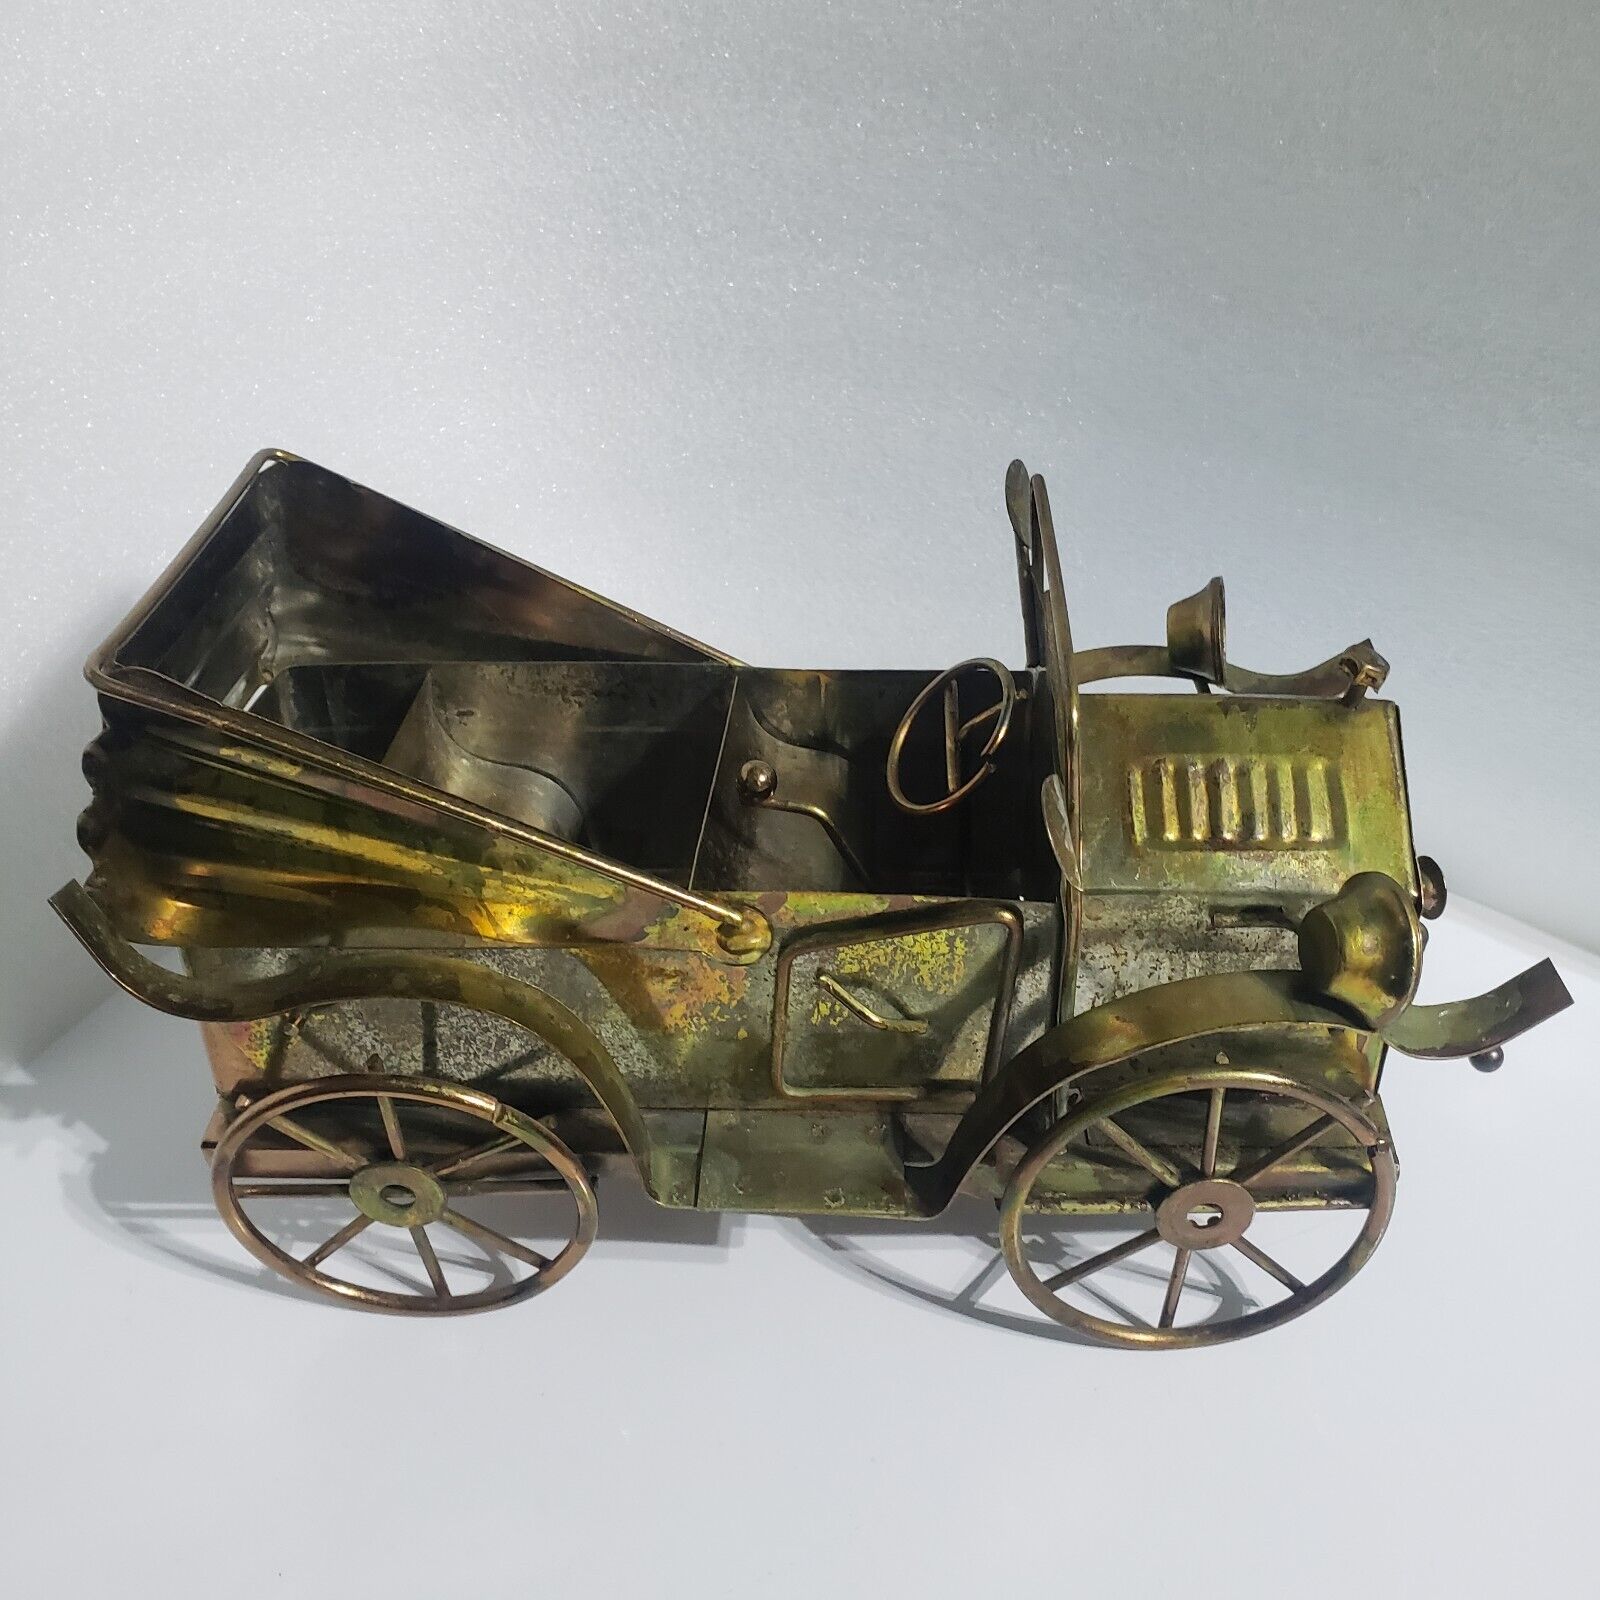  Vintage Copper Tone Tin Welded Metal Art Car Music Box Plays King Of The Road